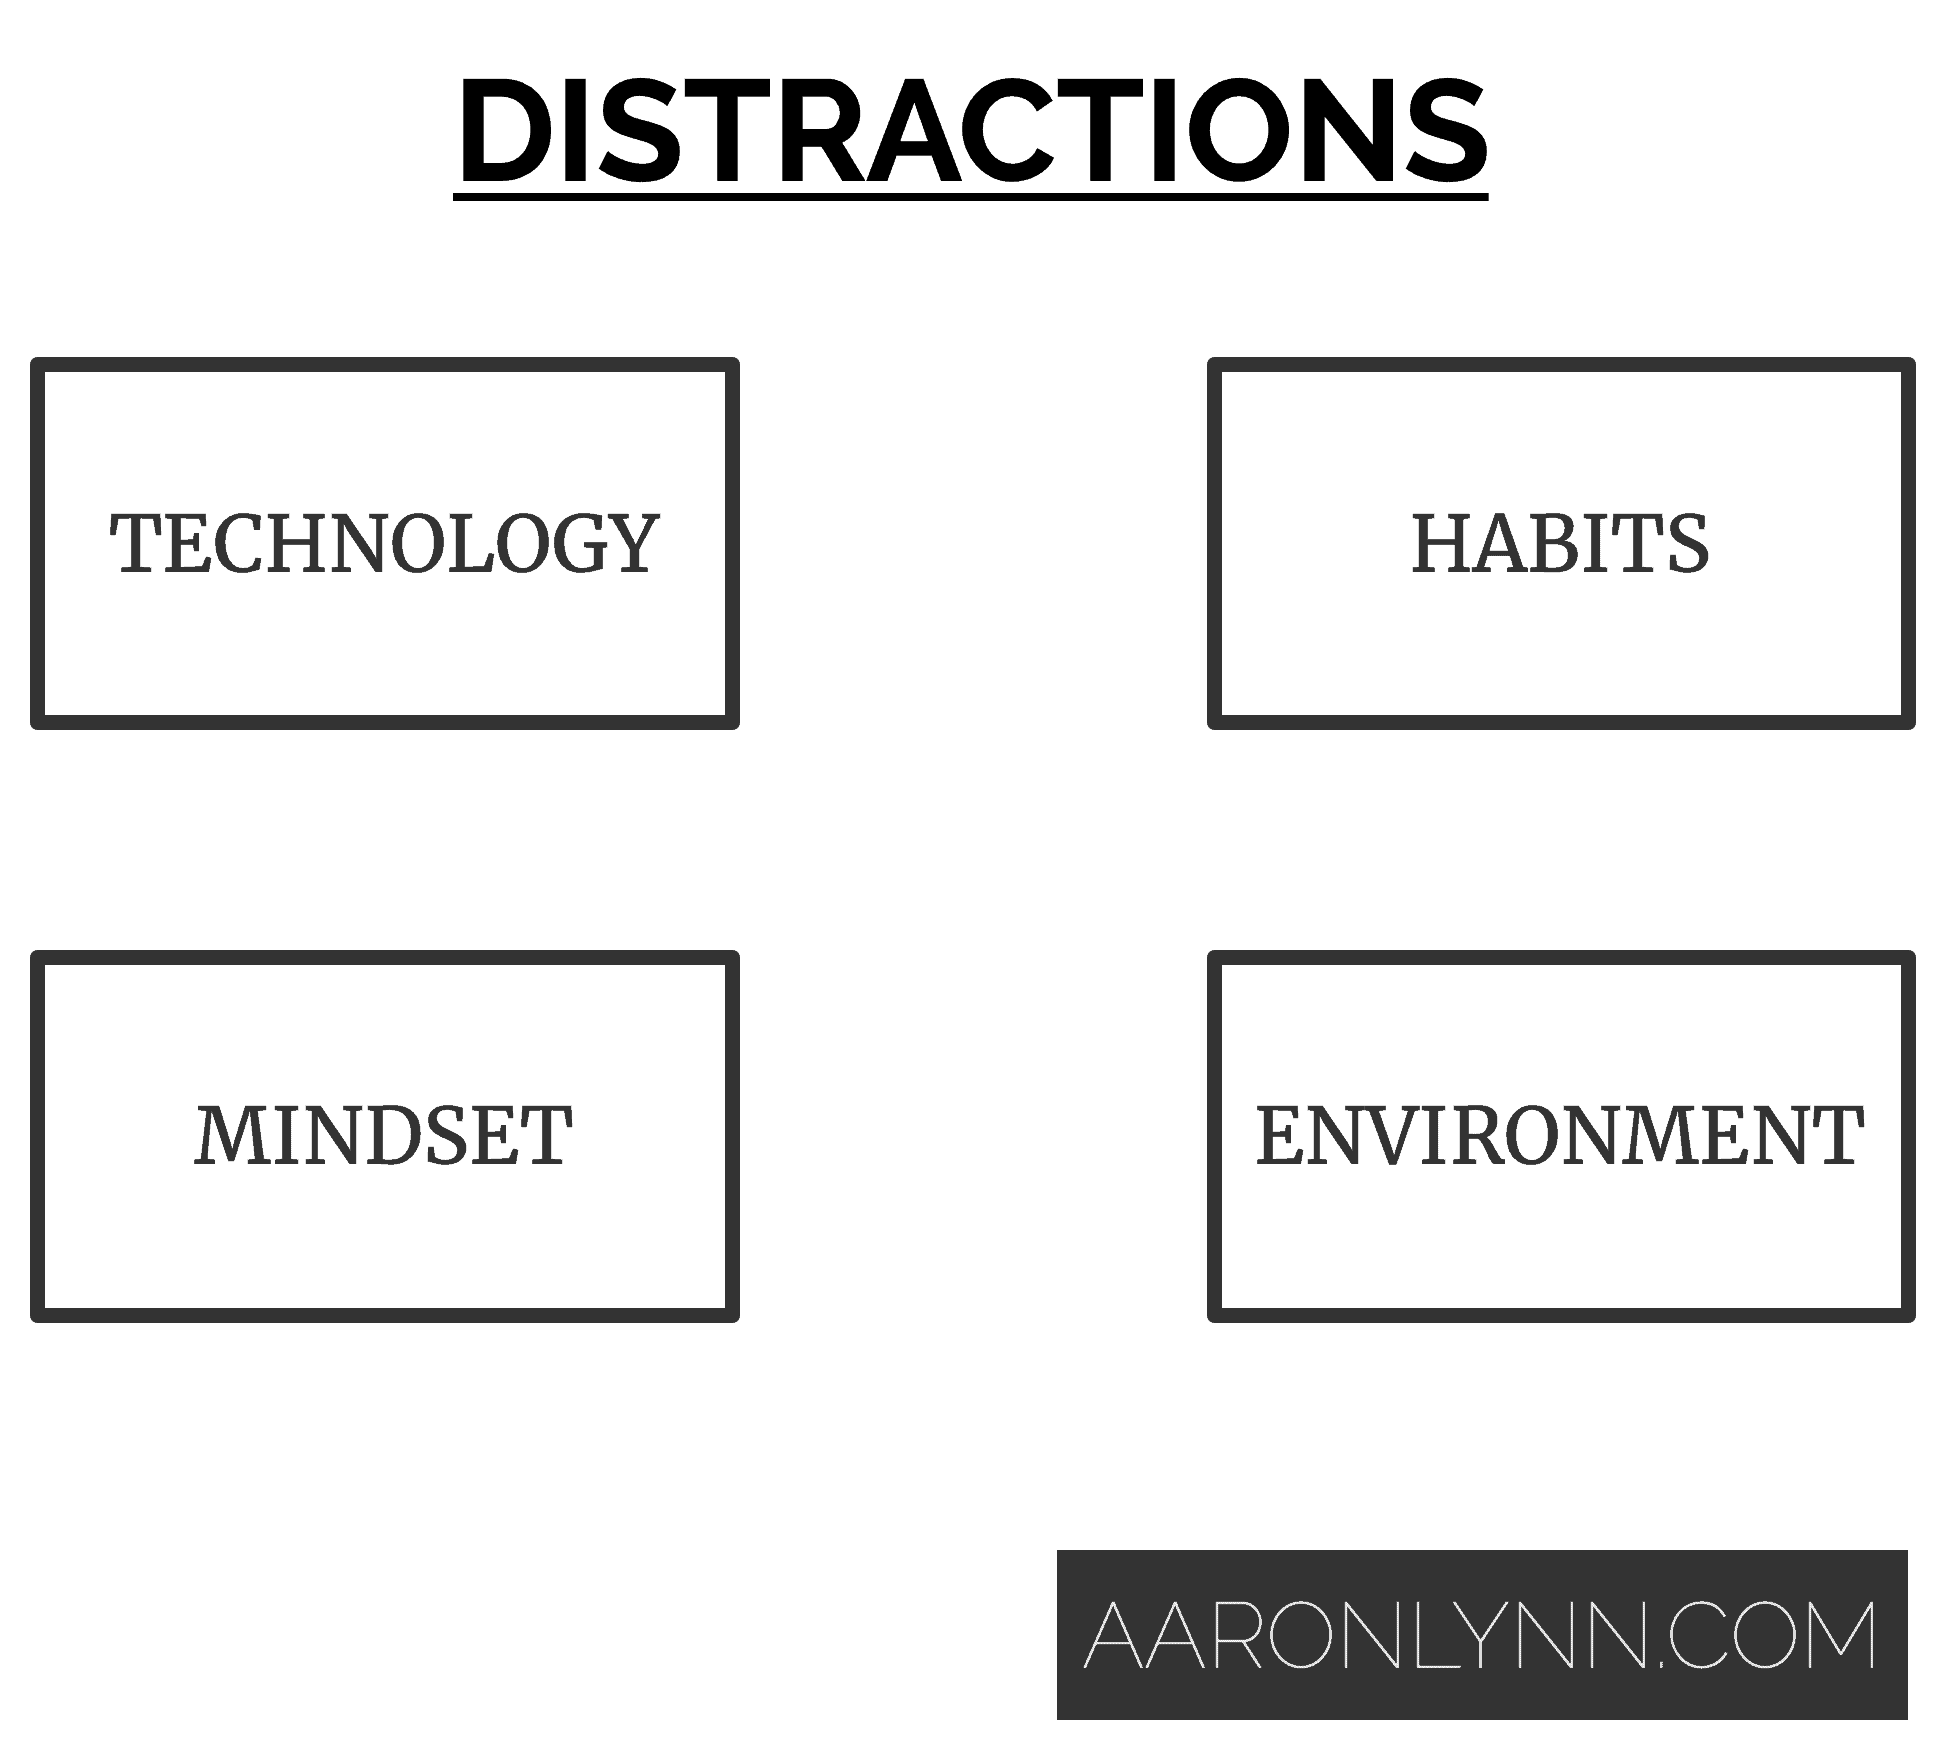 A Model For Distractions